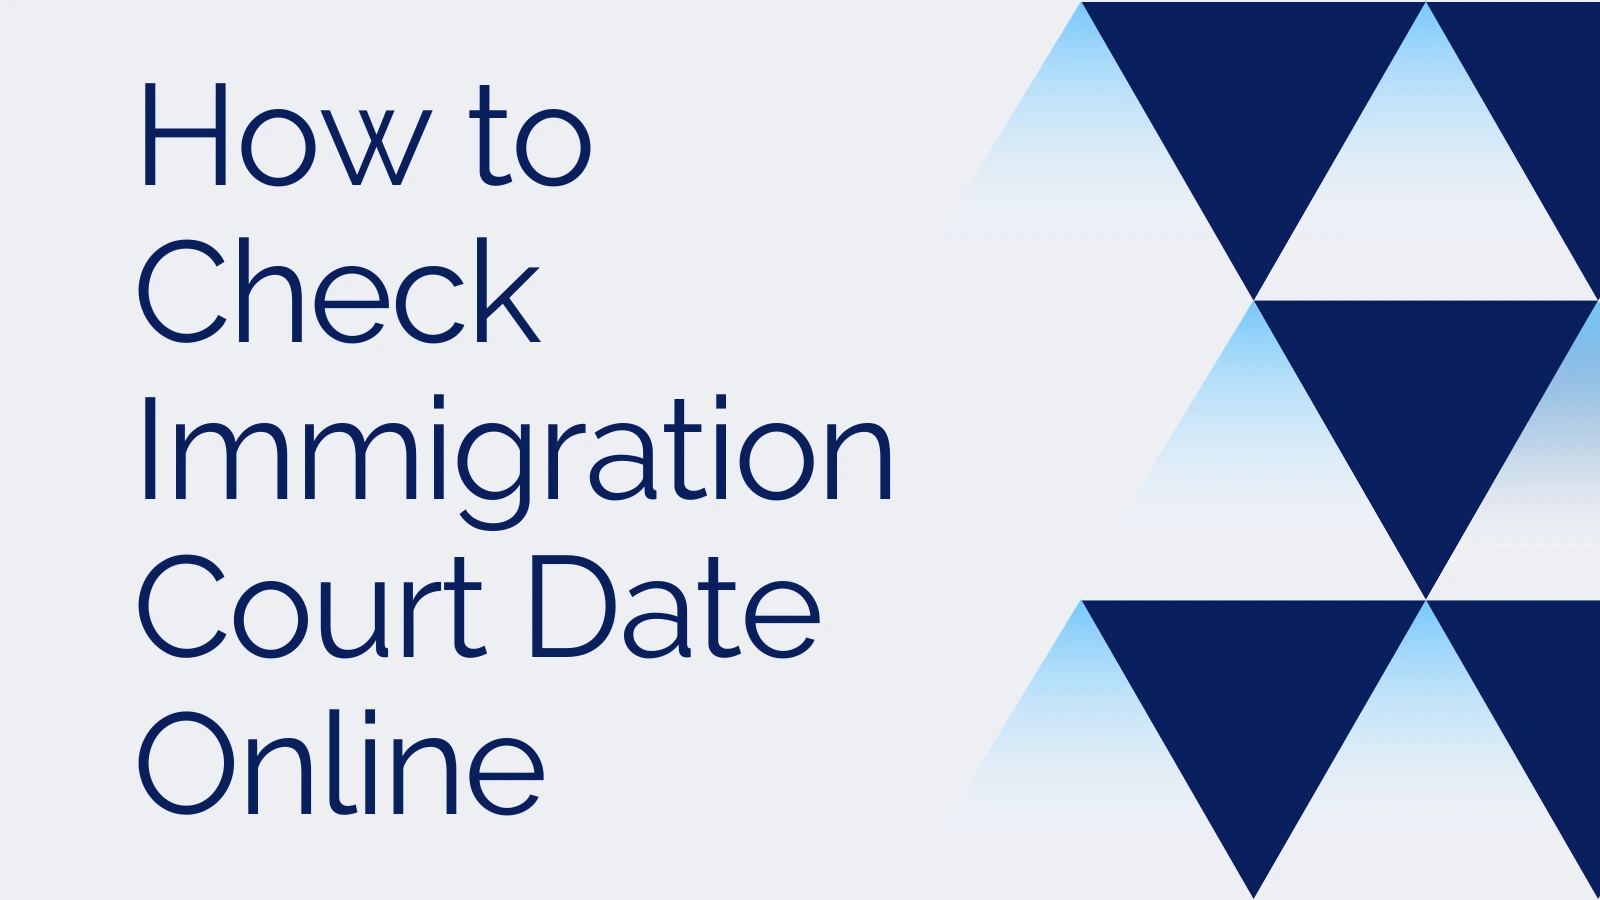 How to Check Immigration Court Date Online